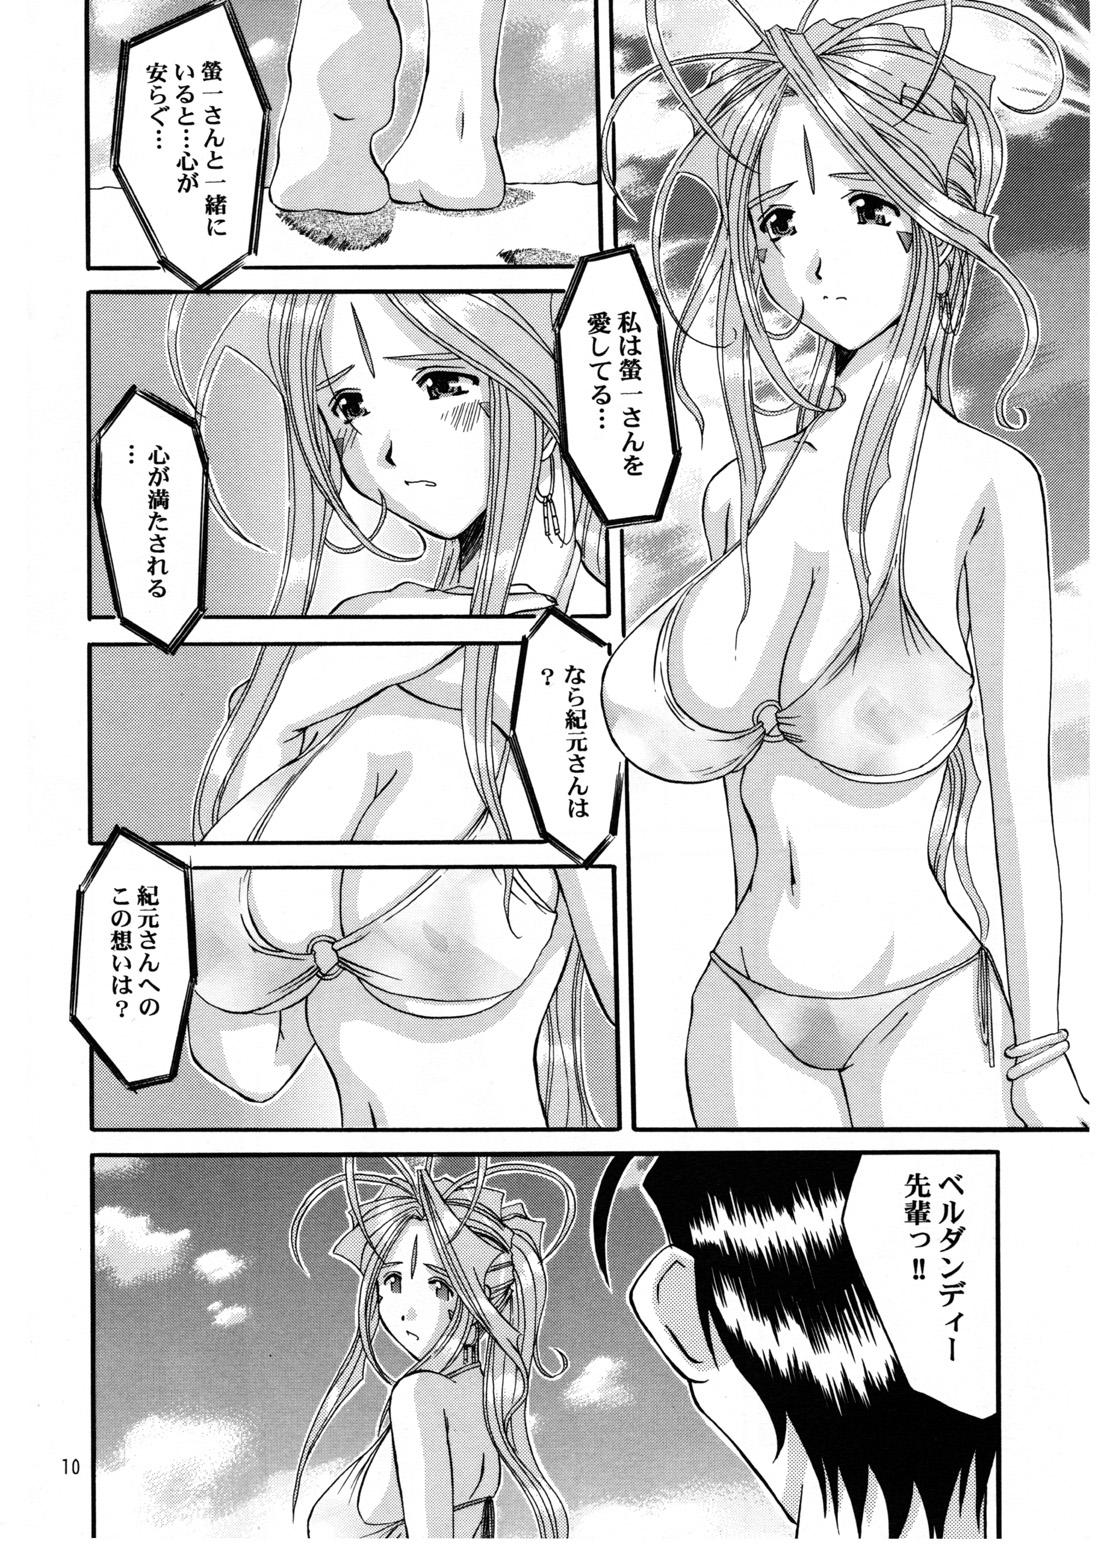 Funk Nightmare of My Goddess Summer Interval - Ah my goddess Tites - Page 10